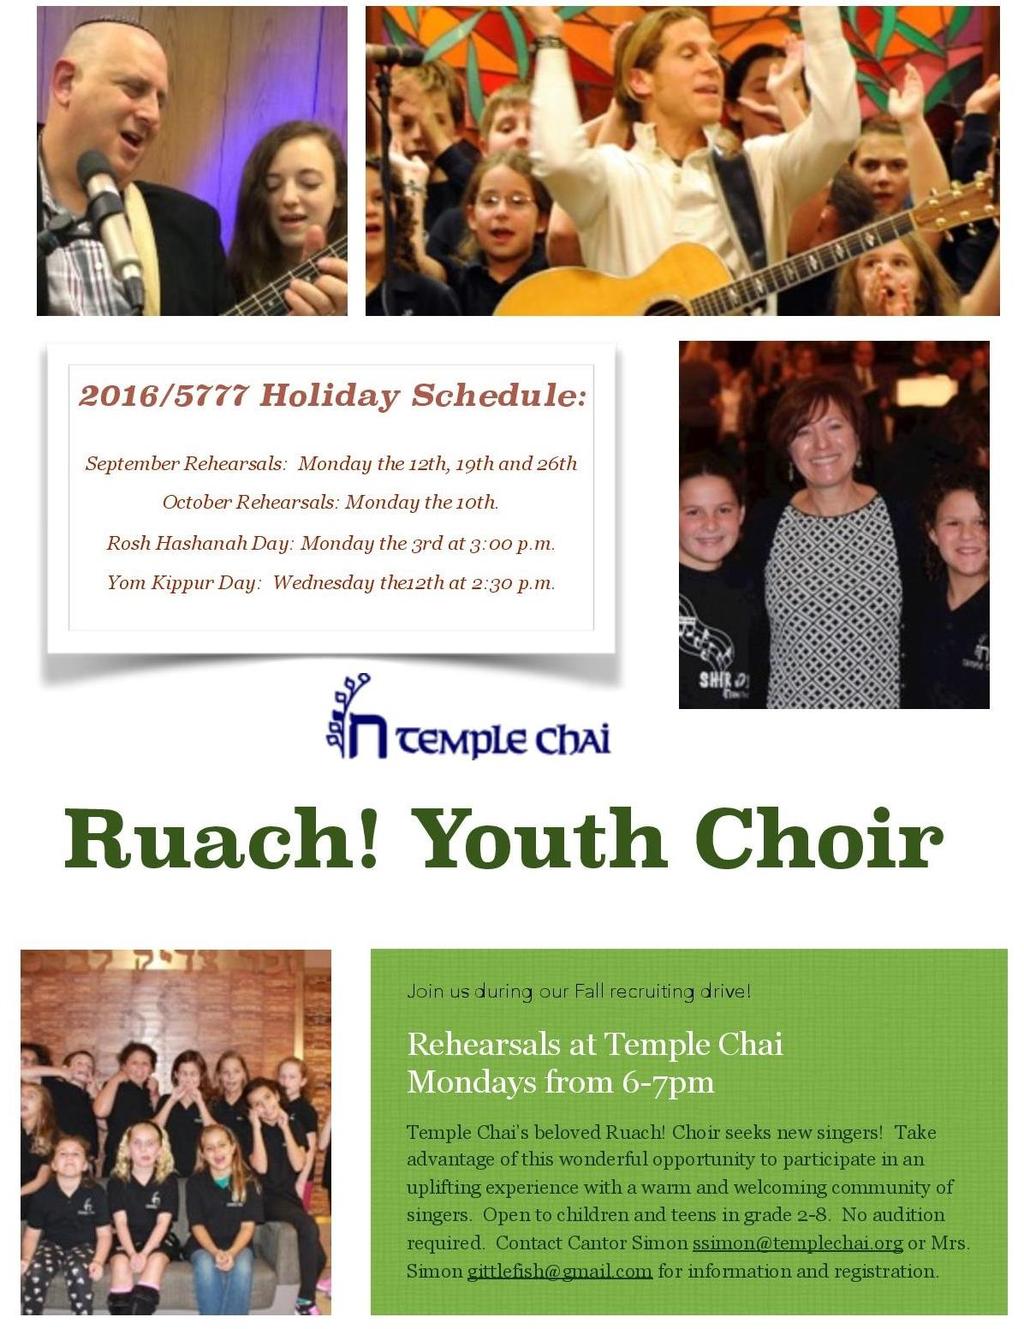 Temple Chai Youth Choir 2017-18/5778 Holiday & Rest of Year Schedule: September Rehearsals: Monday the 11 th, 18 th & 25 th Rosh Hashanah Day: